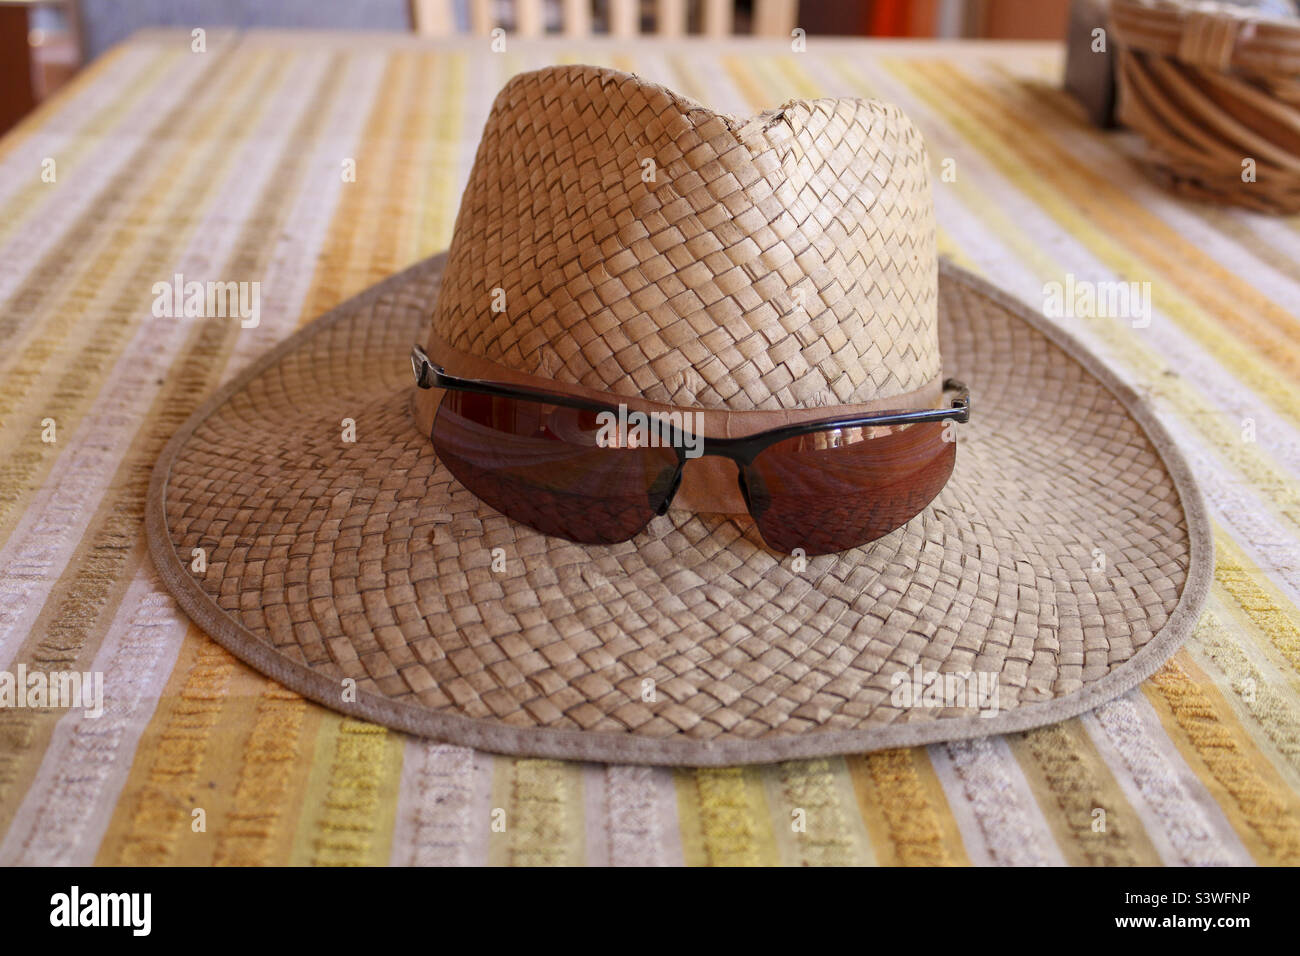 Catral, Spain.10-08-22: Temperatures are going up till 42 degrees this weekend. All you need is a hat and sunglasses. Here on a table with a yellow white tablecloth Stock Photo